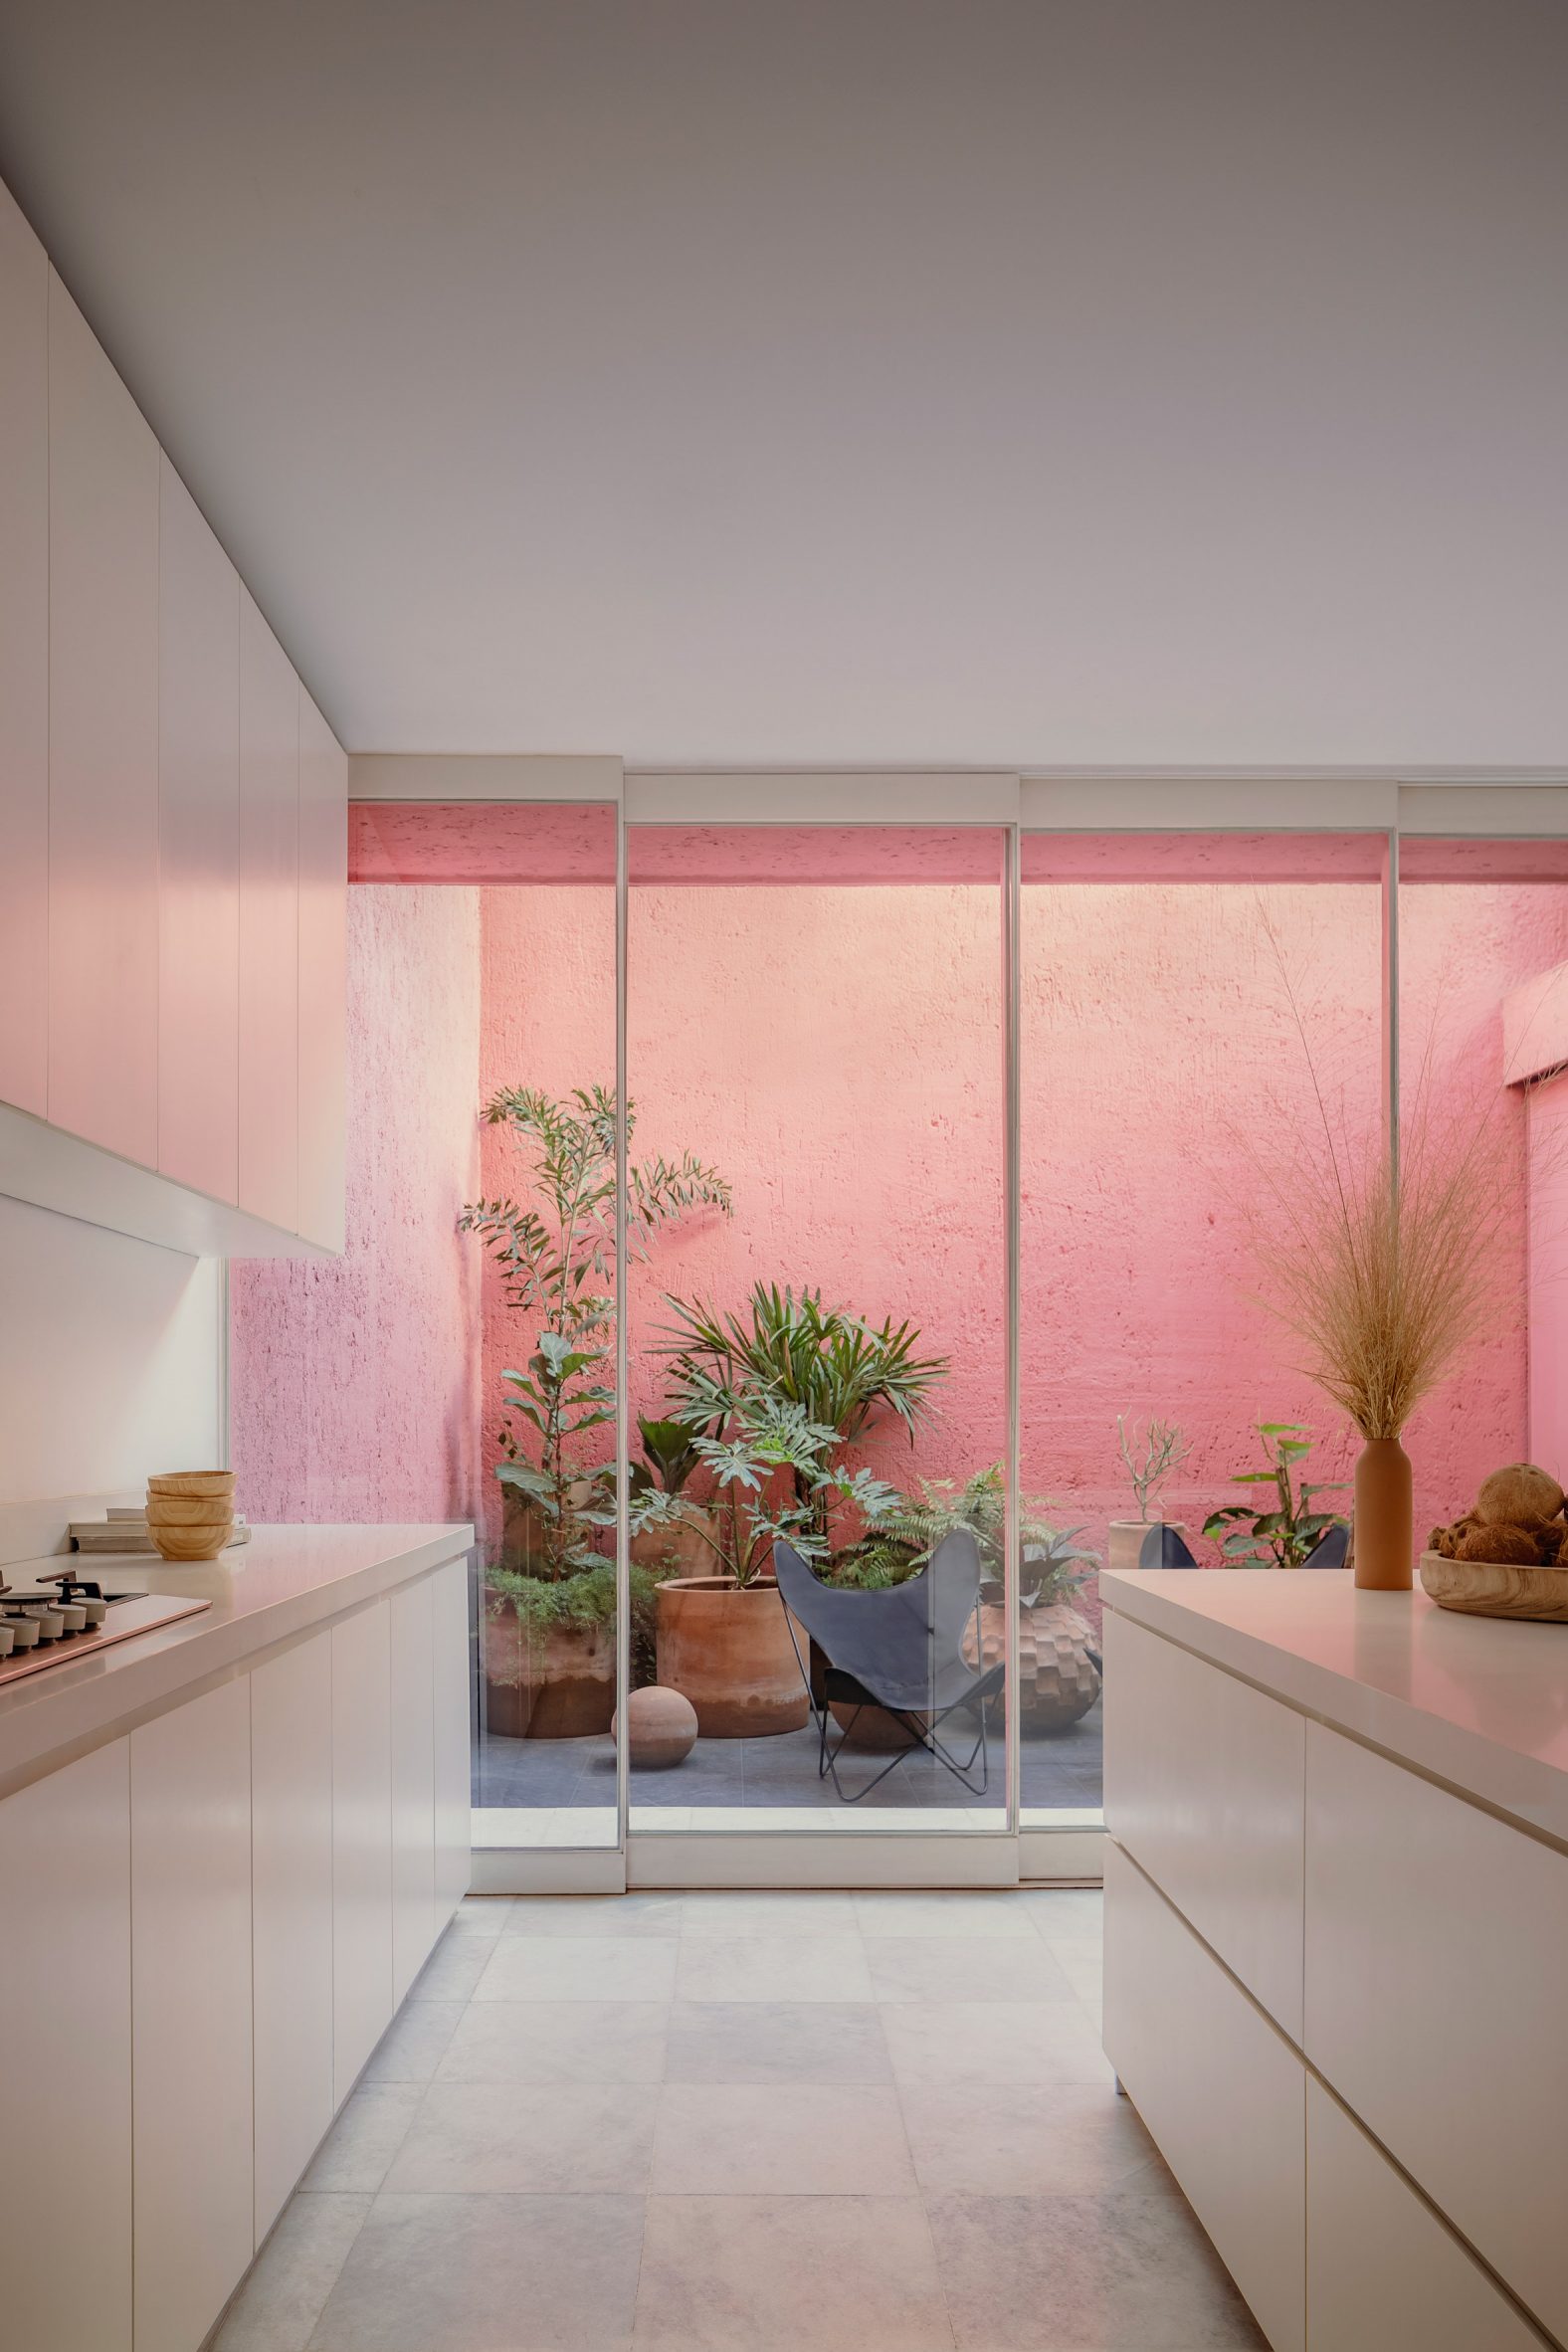 Kitchen facing a potted garden with pink walls